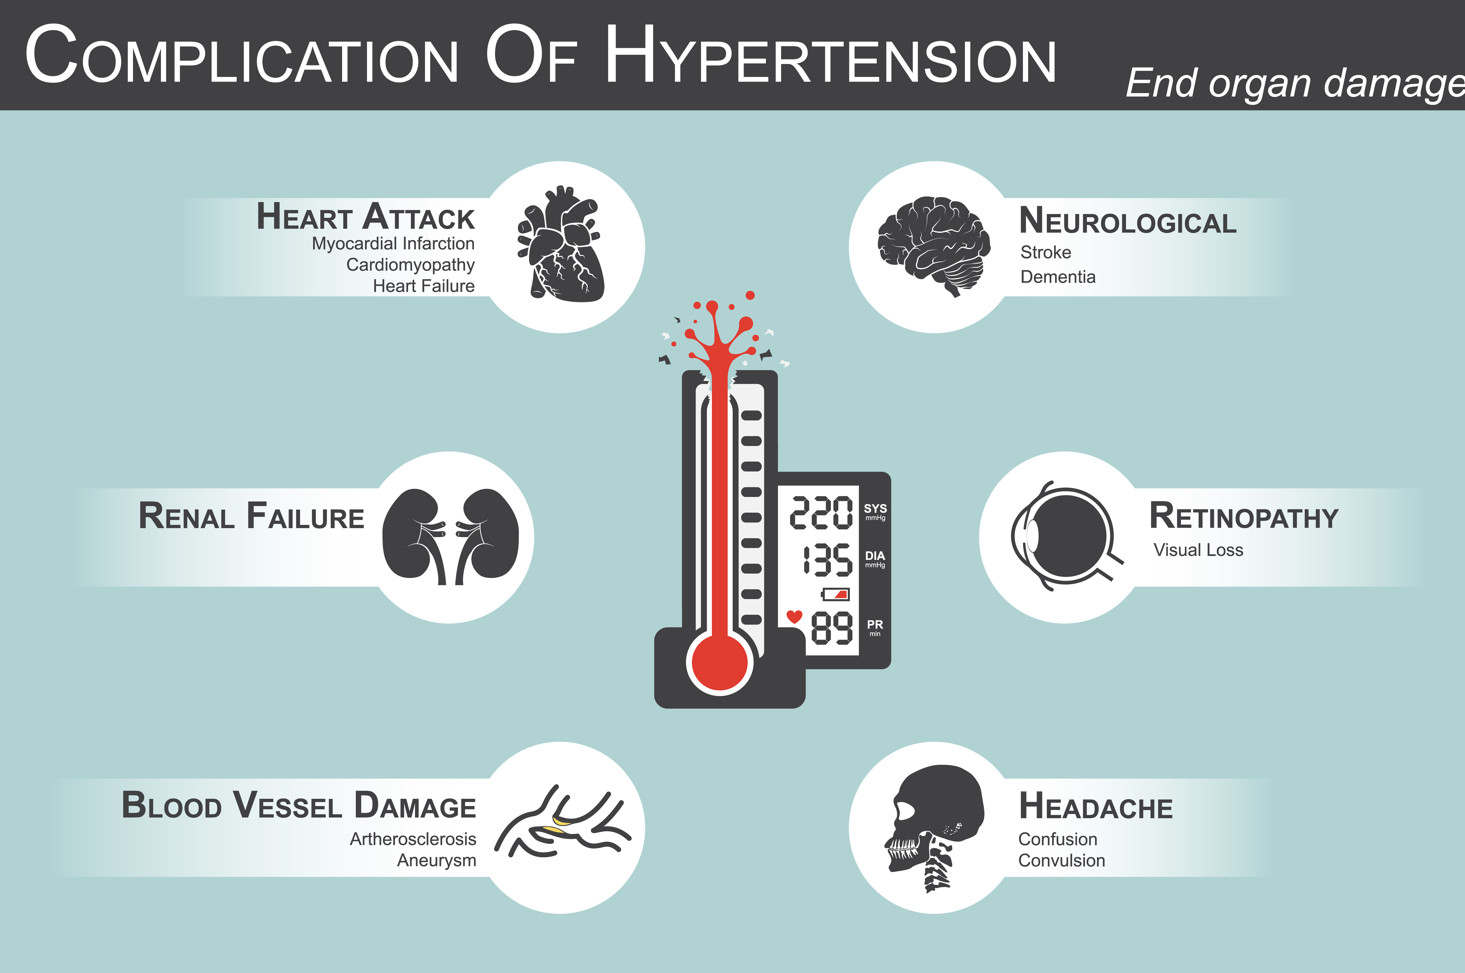 Complications of high blood pressure